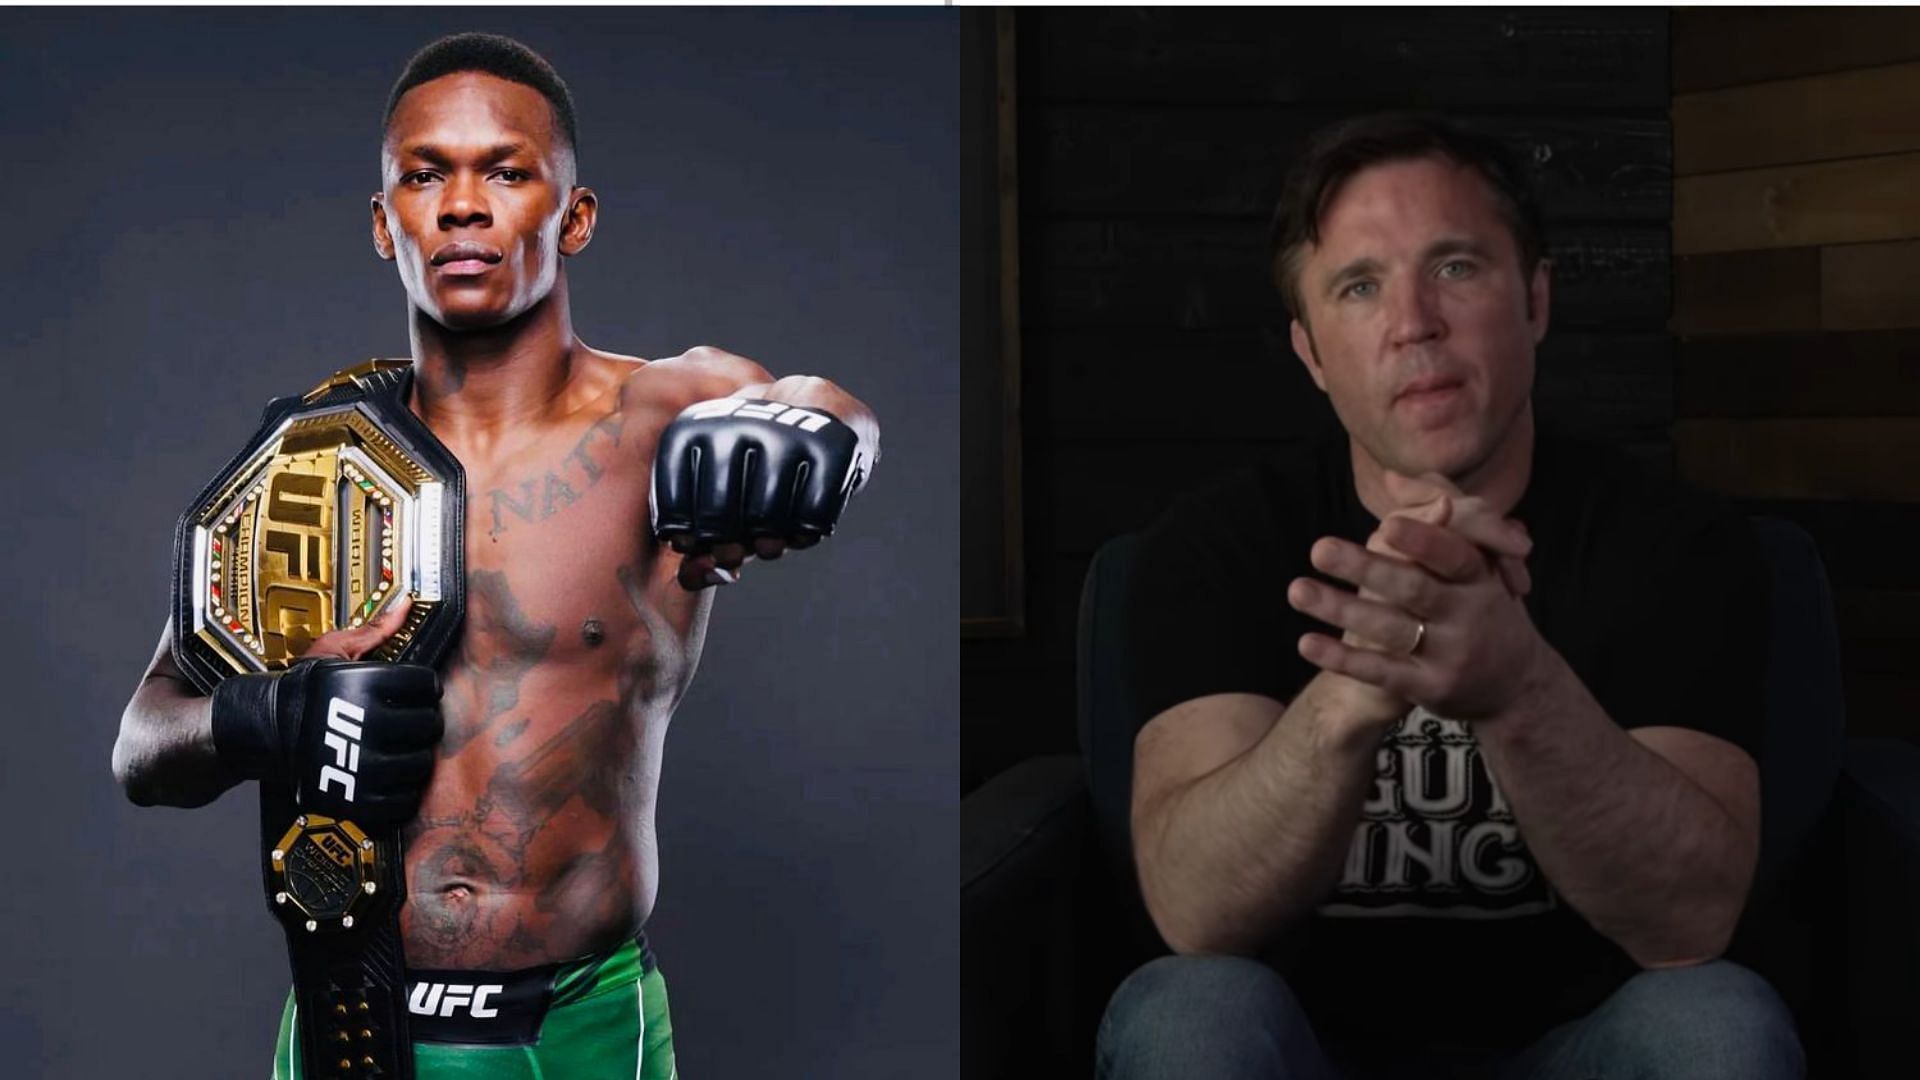 Israel Adesanya (L) and Chael Sonnen (R) [Images courtesy: @stylebender and @sonnench on Instagram]